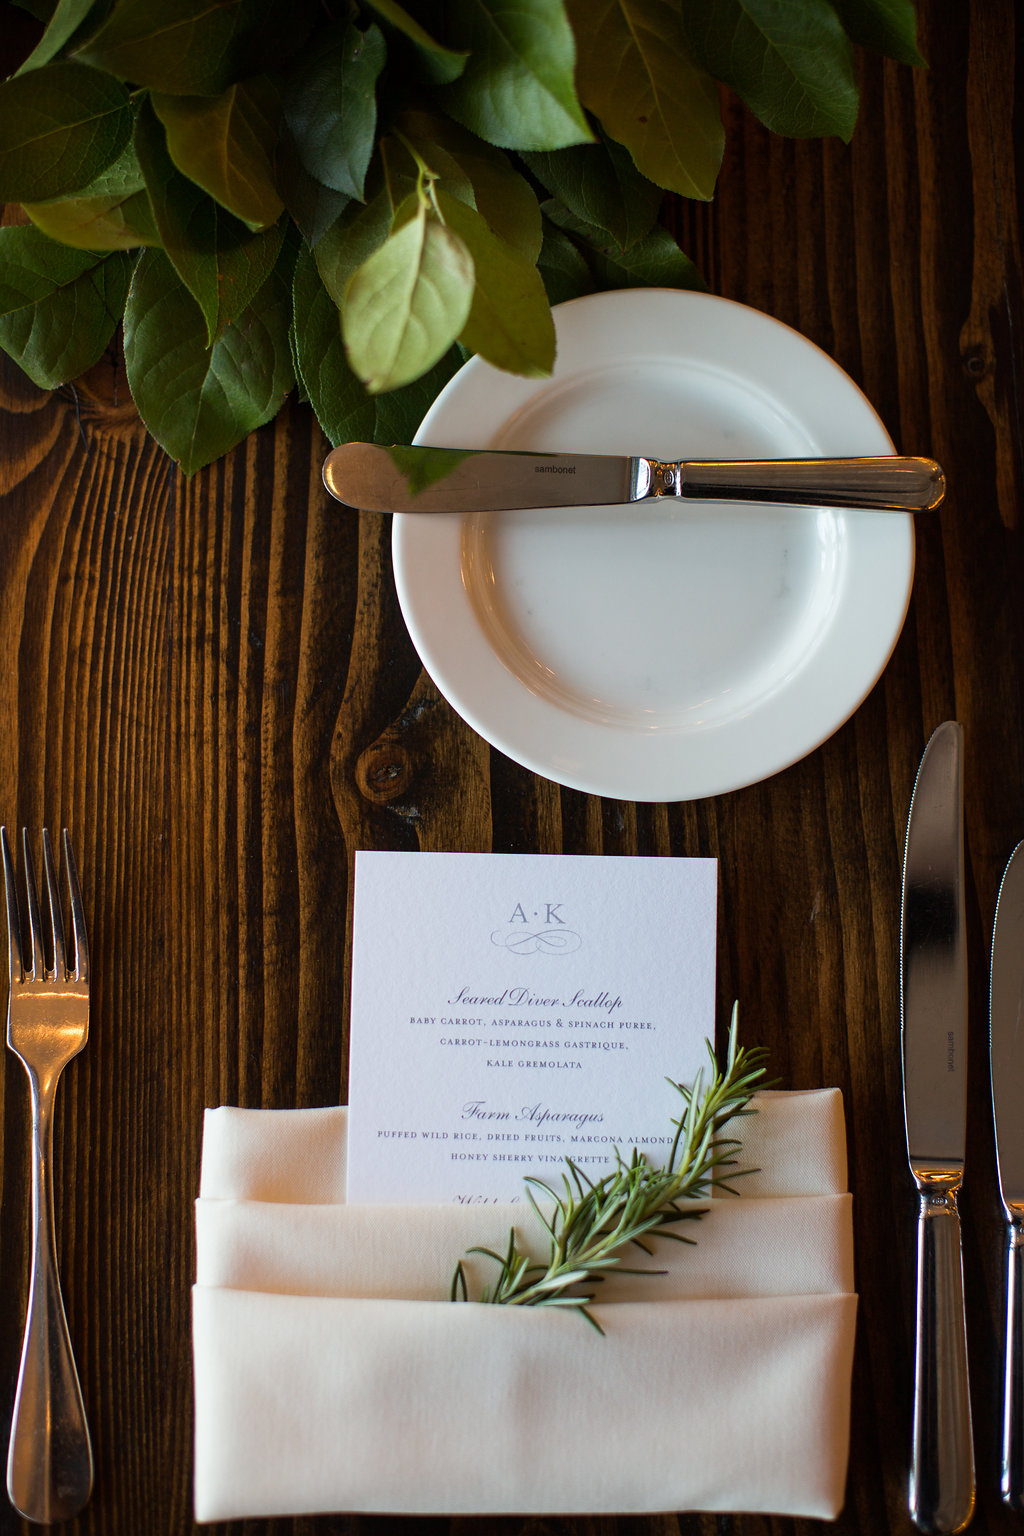 Wedding place setting with rosemary sprig in napkin with menu.